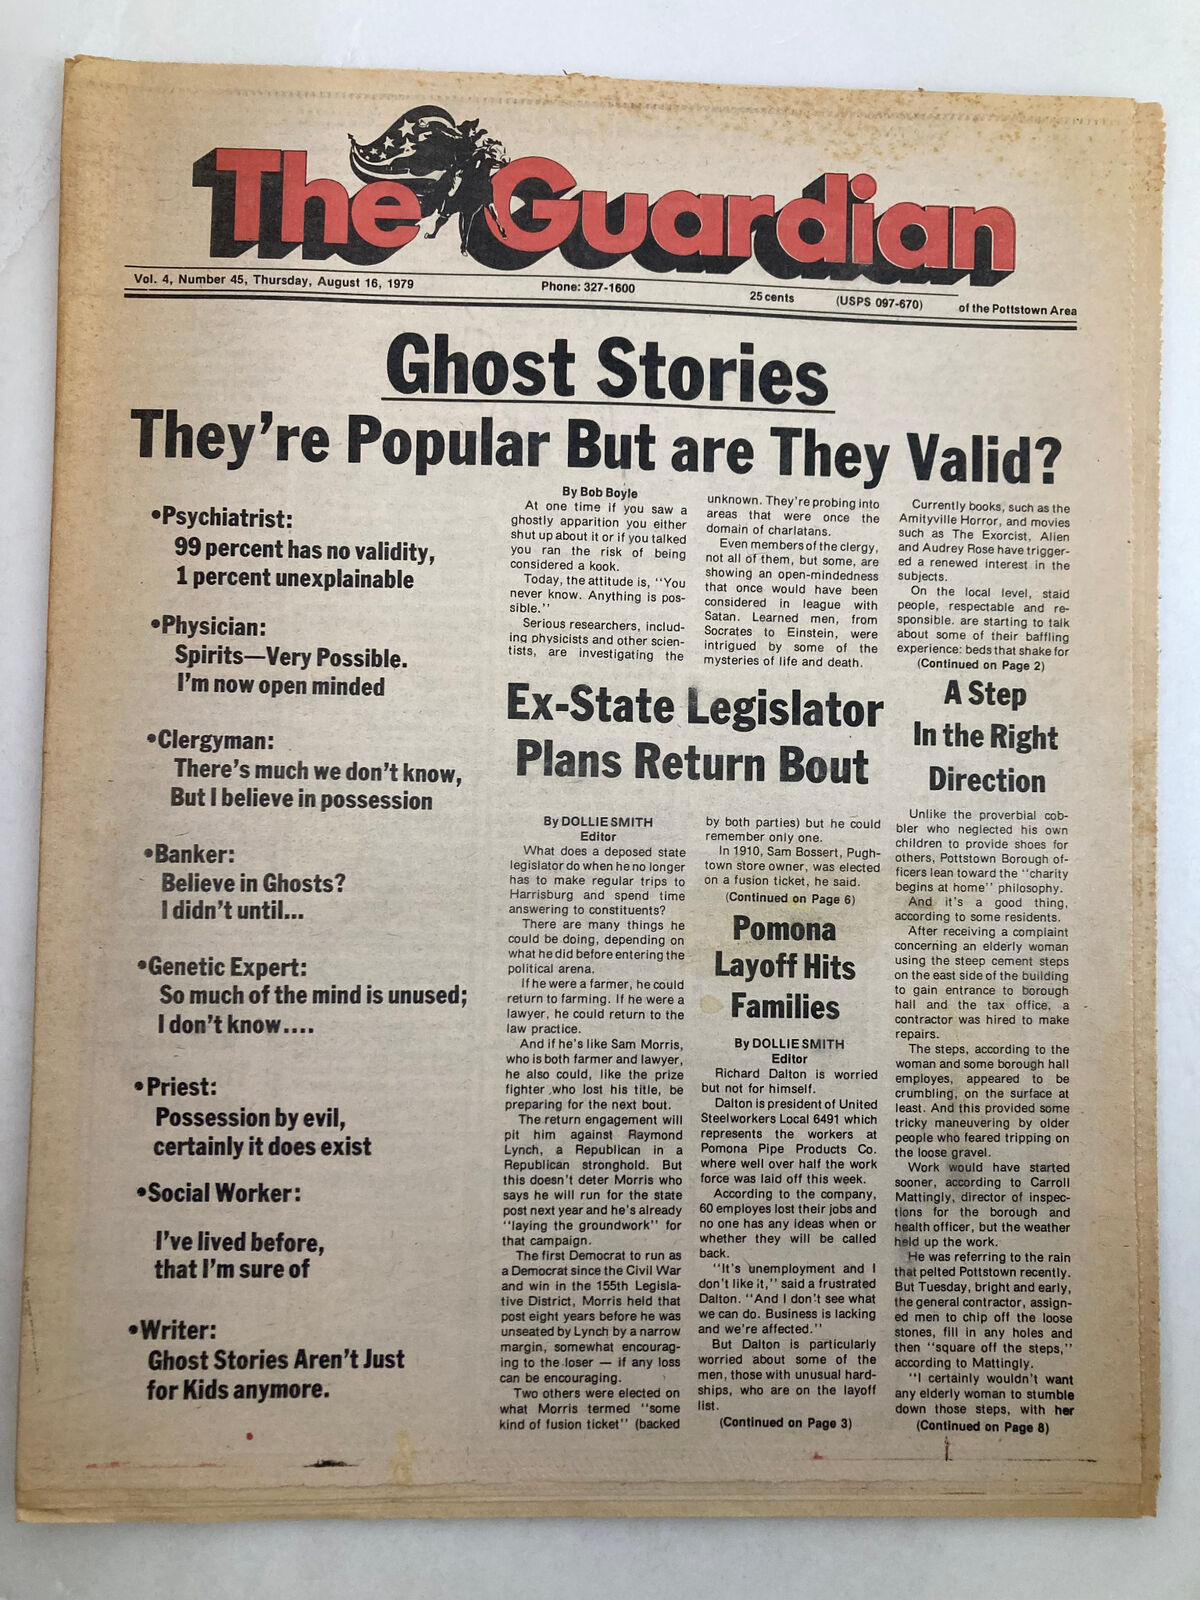 The Guardian Newspaper August 16 1979 Vol 4 #45 Ghost Stories They're Popular